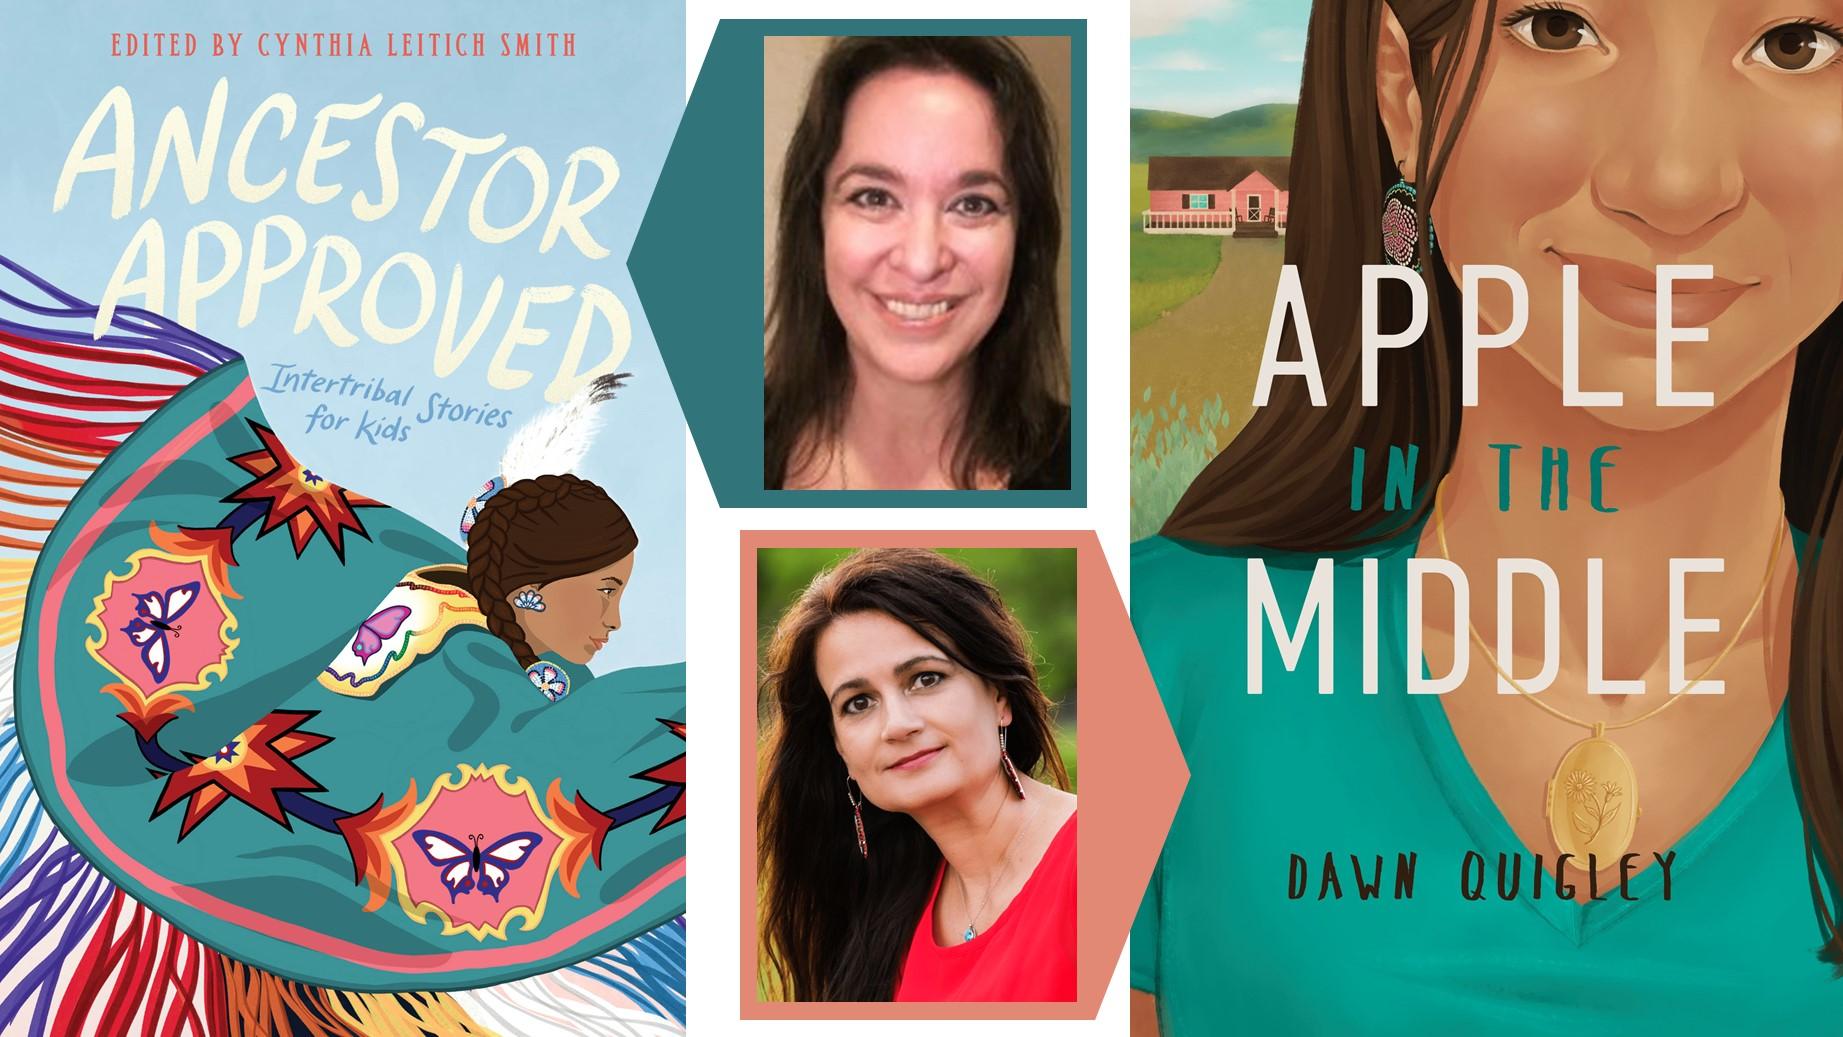 An image of the bookcovers of "Ancestor Approved" and "Apple in the Middle" accompanied by photos of their authors, Cynthia Leitich Smith and Dawn Quigley